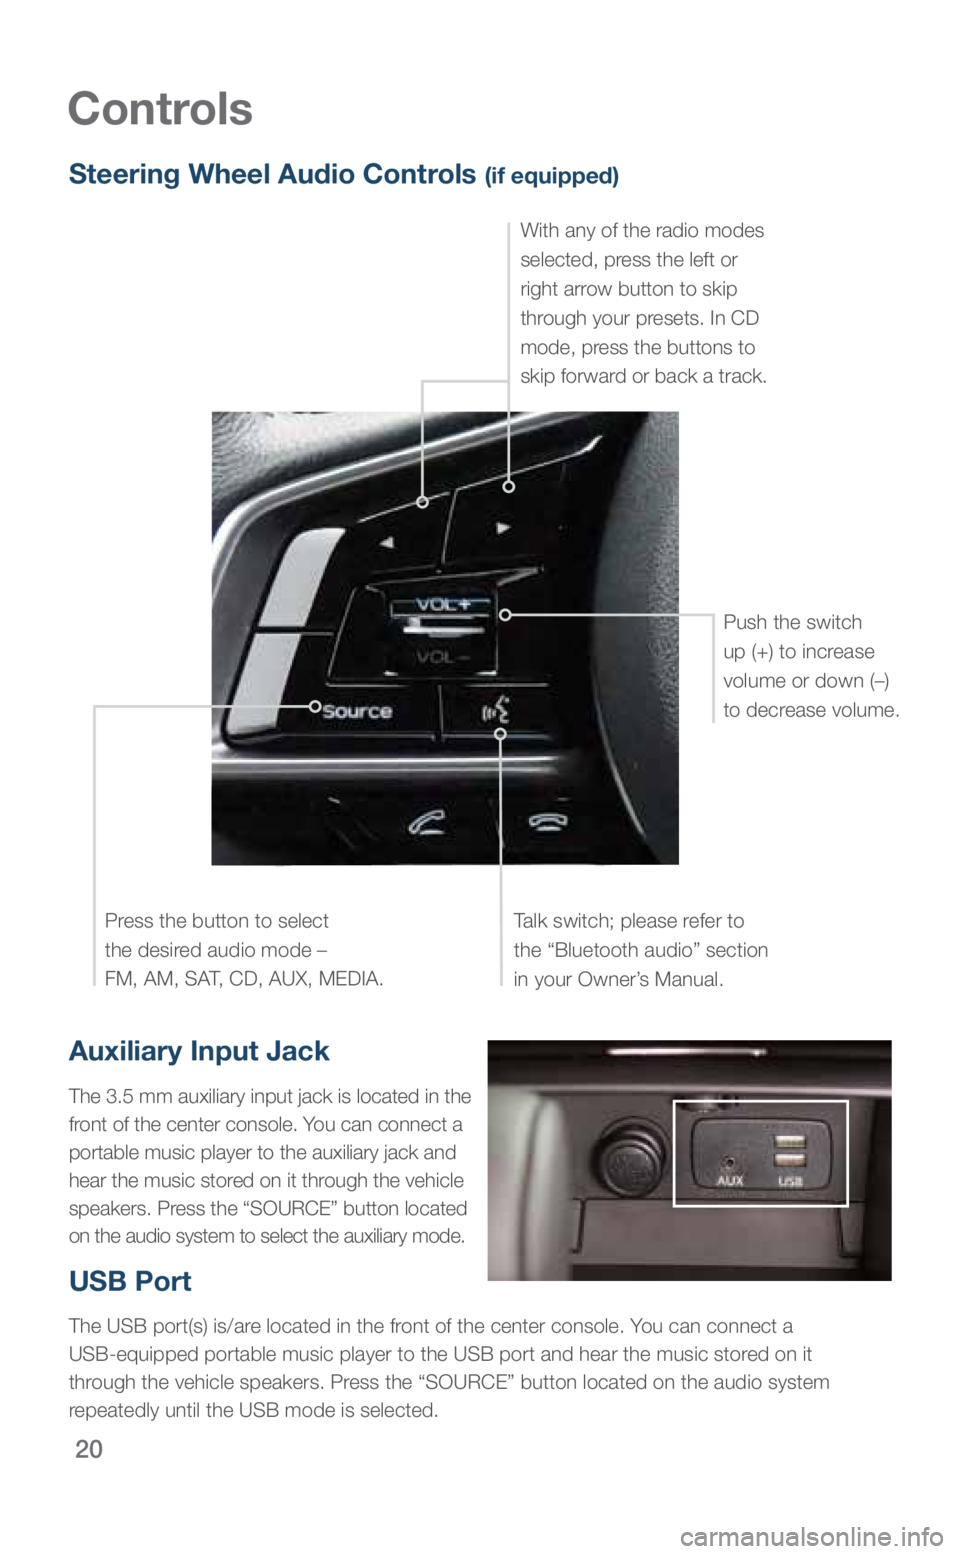 SUBARU OUTBACK 2018  Quick Guide 20
Controls
Auxiliary Input Jack
The 3.5 mm auxiliary input jack is located in the 
front of the center console. You can connect a 
portable music player to the auxiliary jack and 
hear the music stor